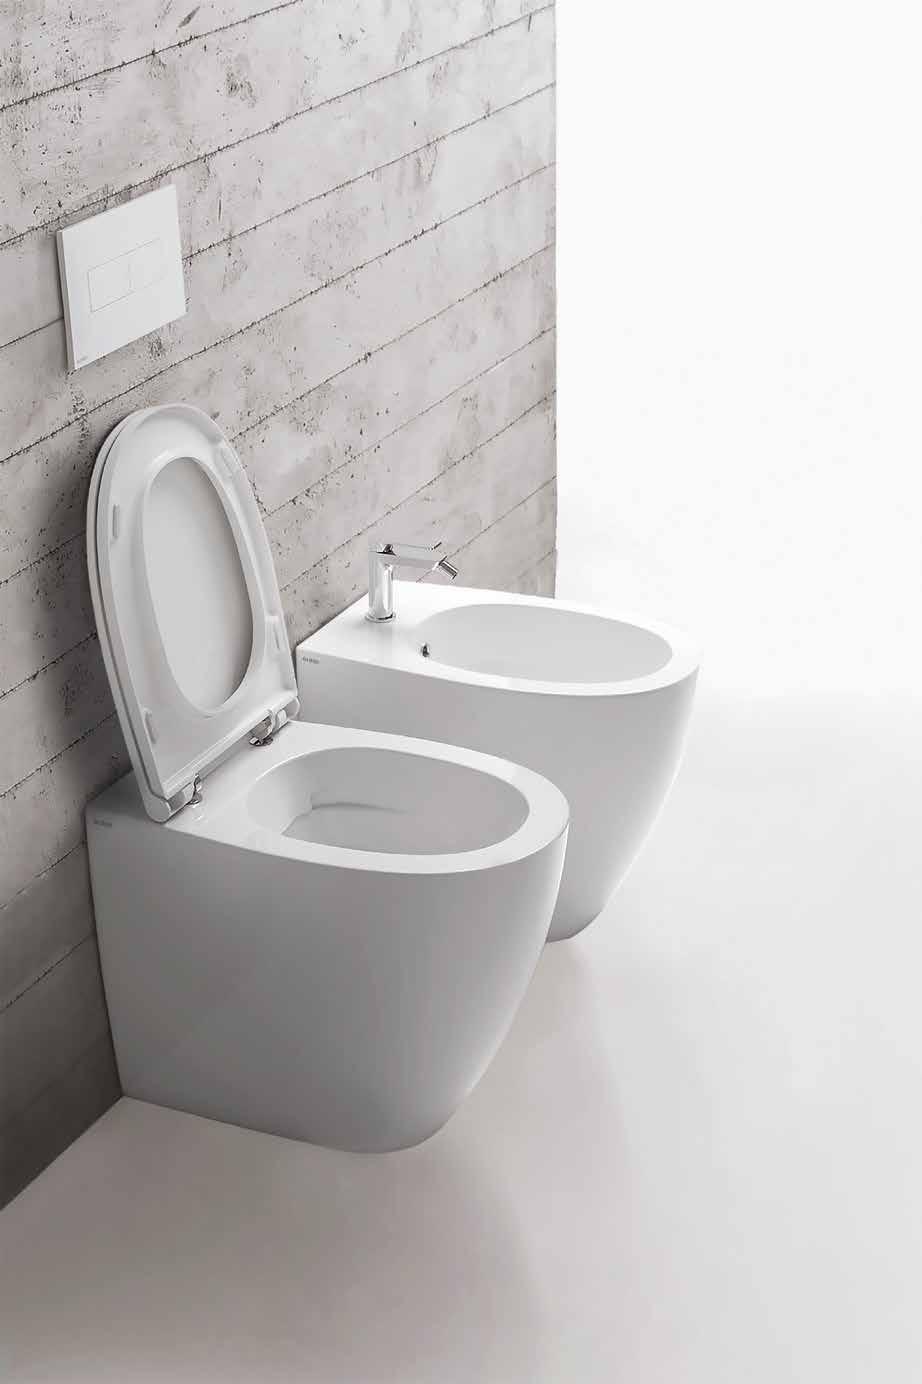 Floor-mounted WC and bidet 54. MD003.